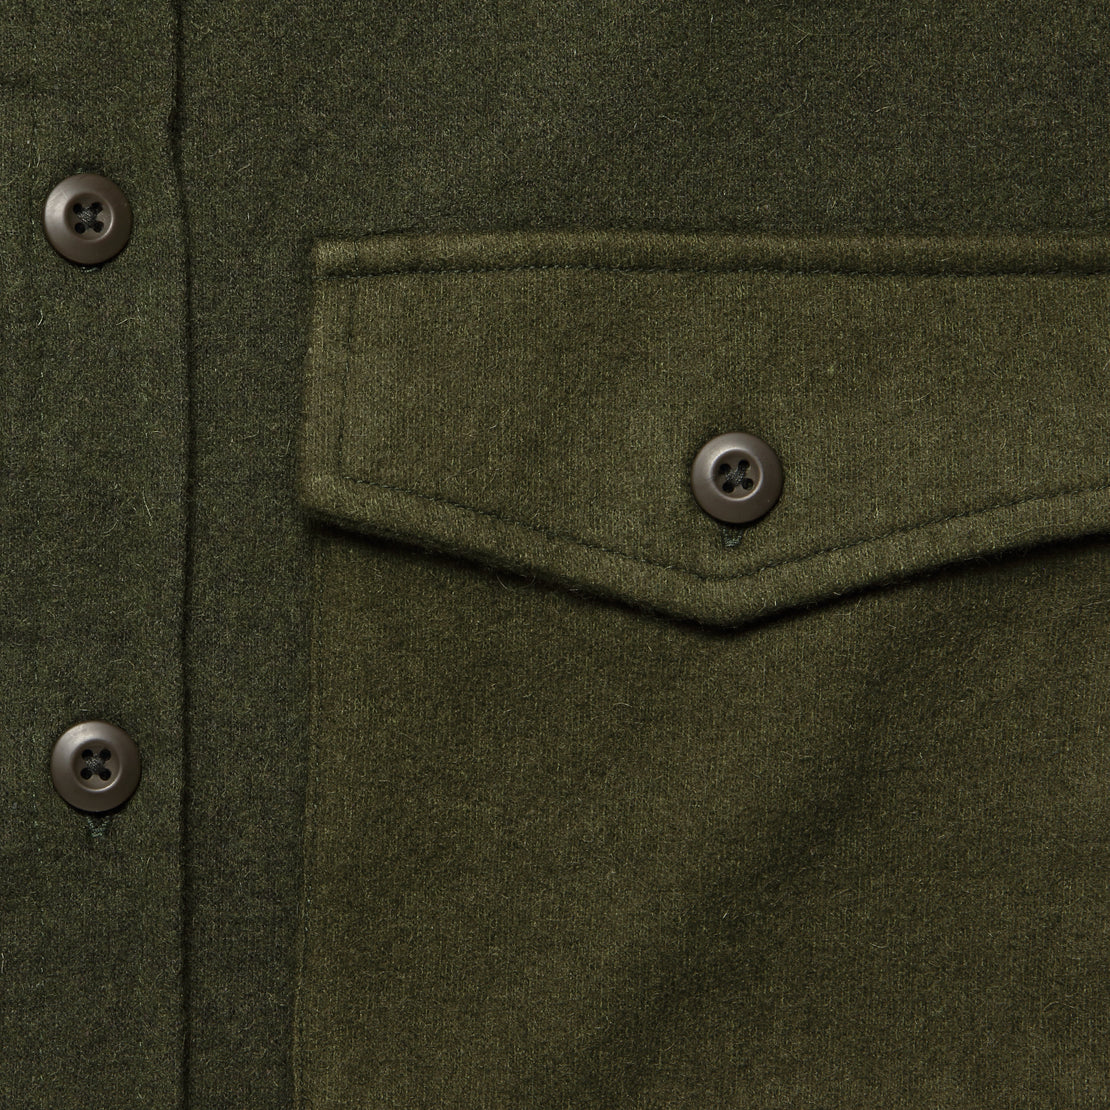 Surplus Wool Overshirt - Olive Loden - Grayers - STAG Provisions - Tops - L/S Woven - Overshirt